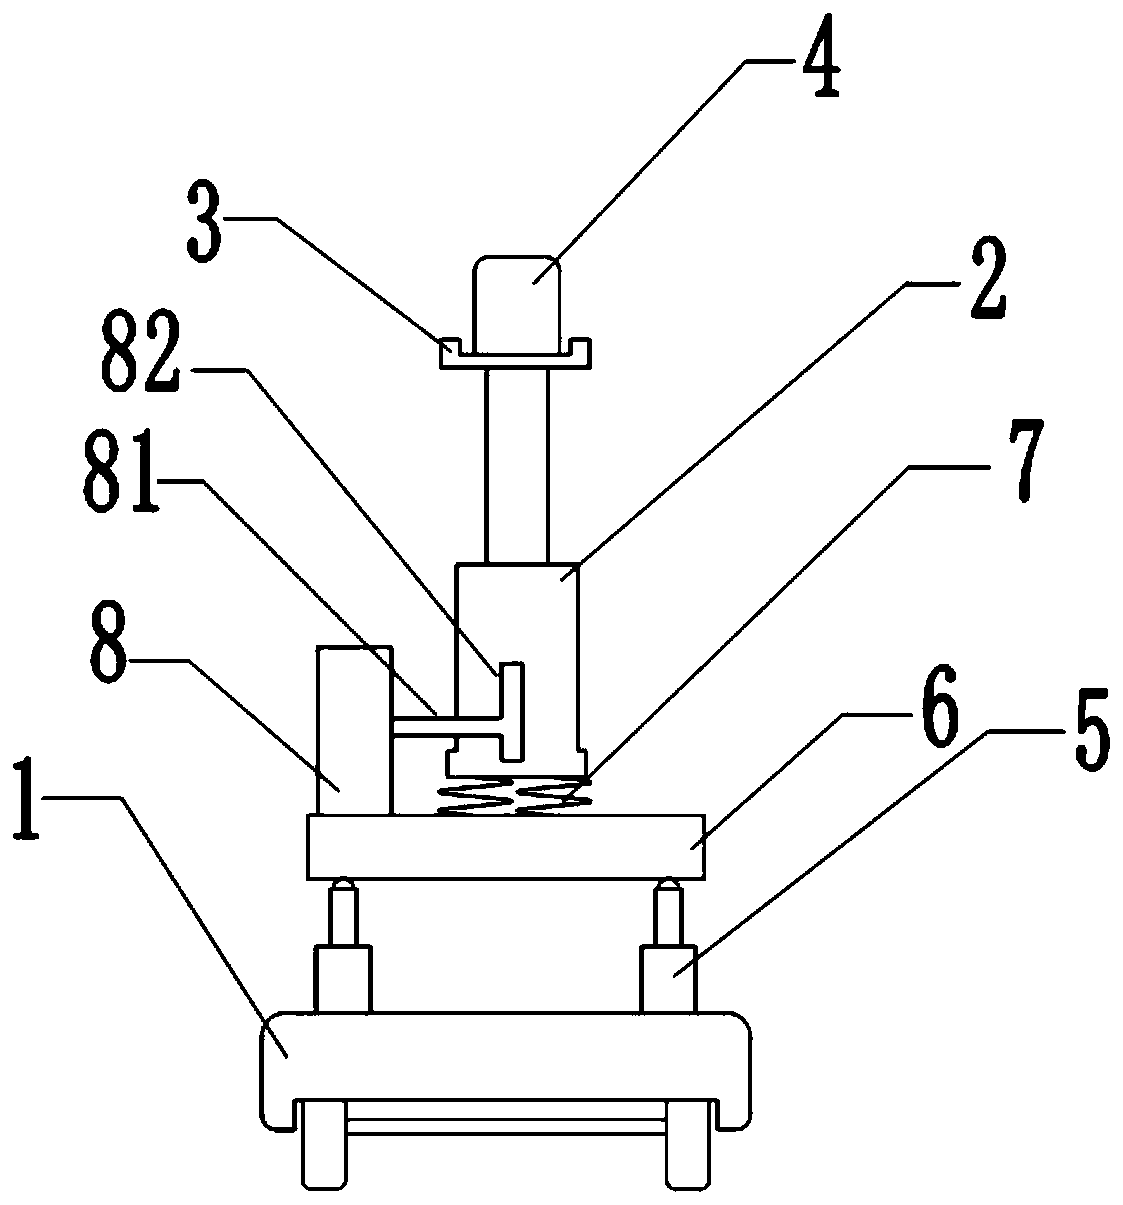 Height adjusting method for coal checking system